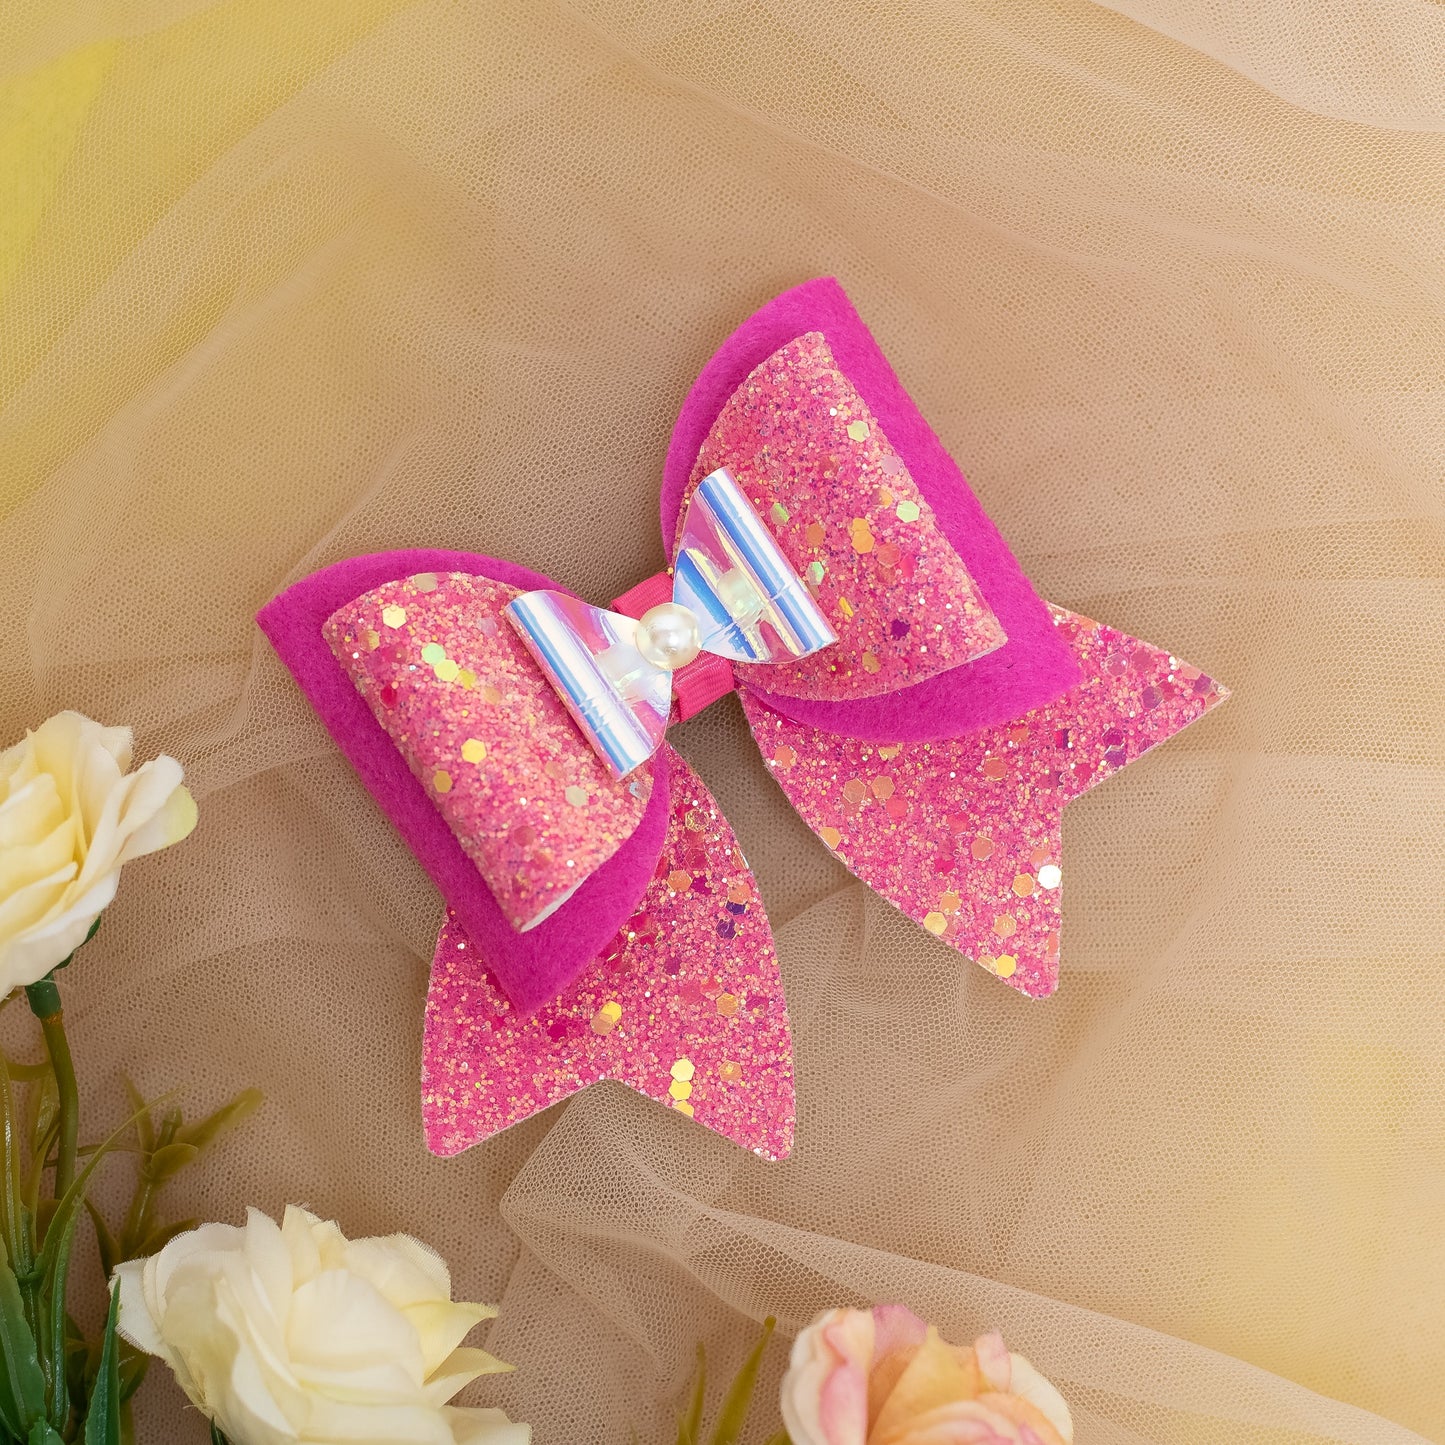 Large, Fancy Party Bow with Shimmer on Alligator Clip- Pink